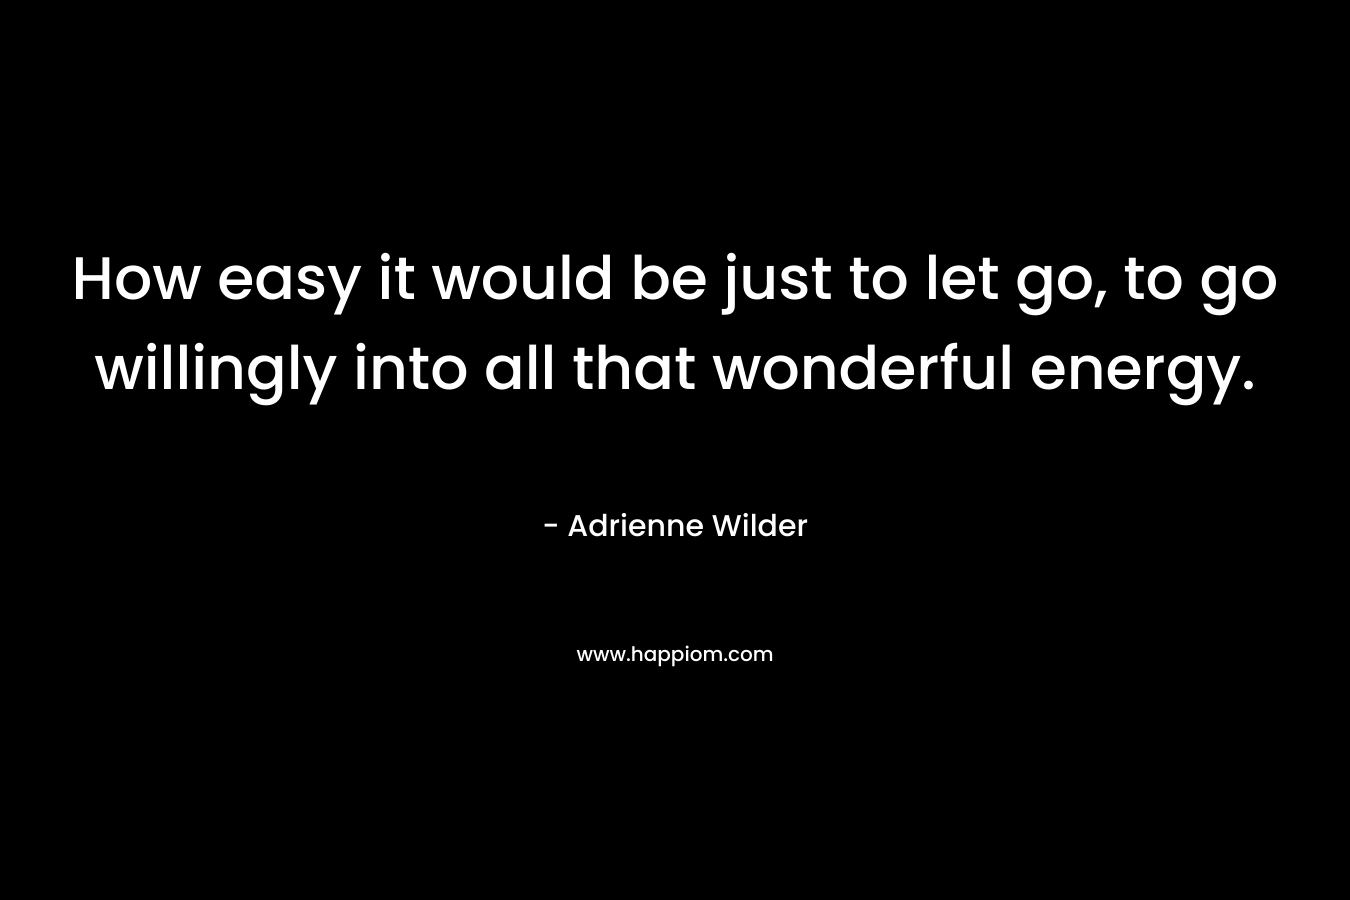 How easy it would be just to let go, to go willingly into all that wonderful energy.